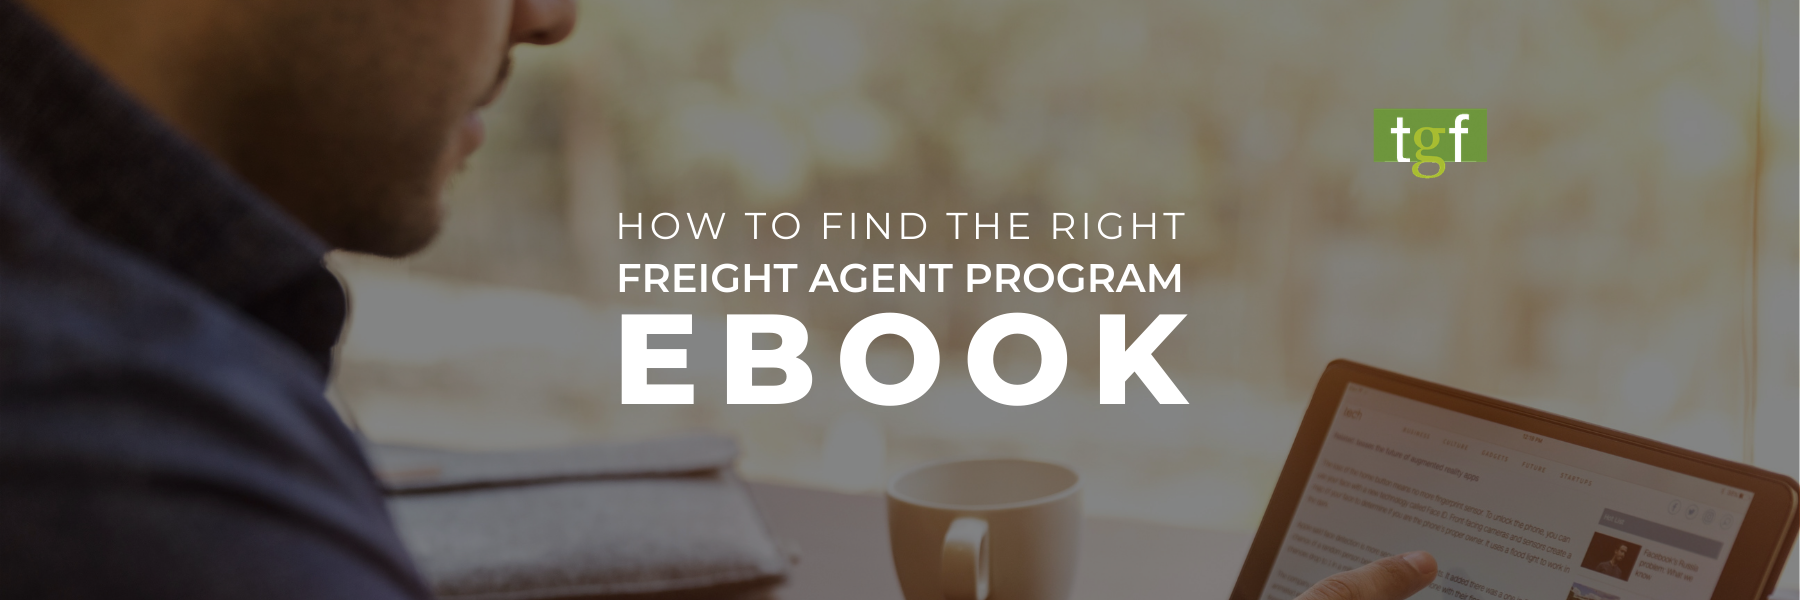 You are currently viewing Explore How to Find the Right Freight Agent Program in Our eBook